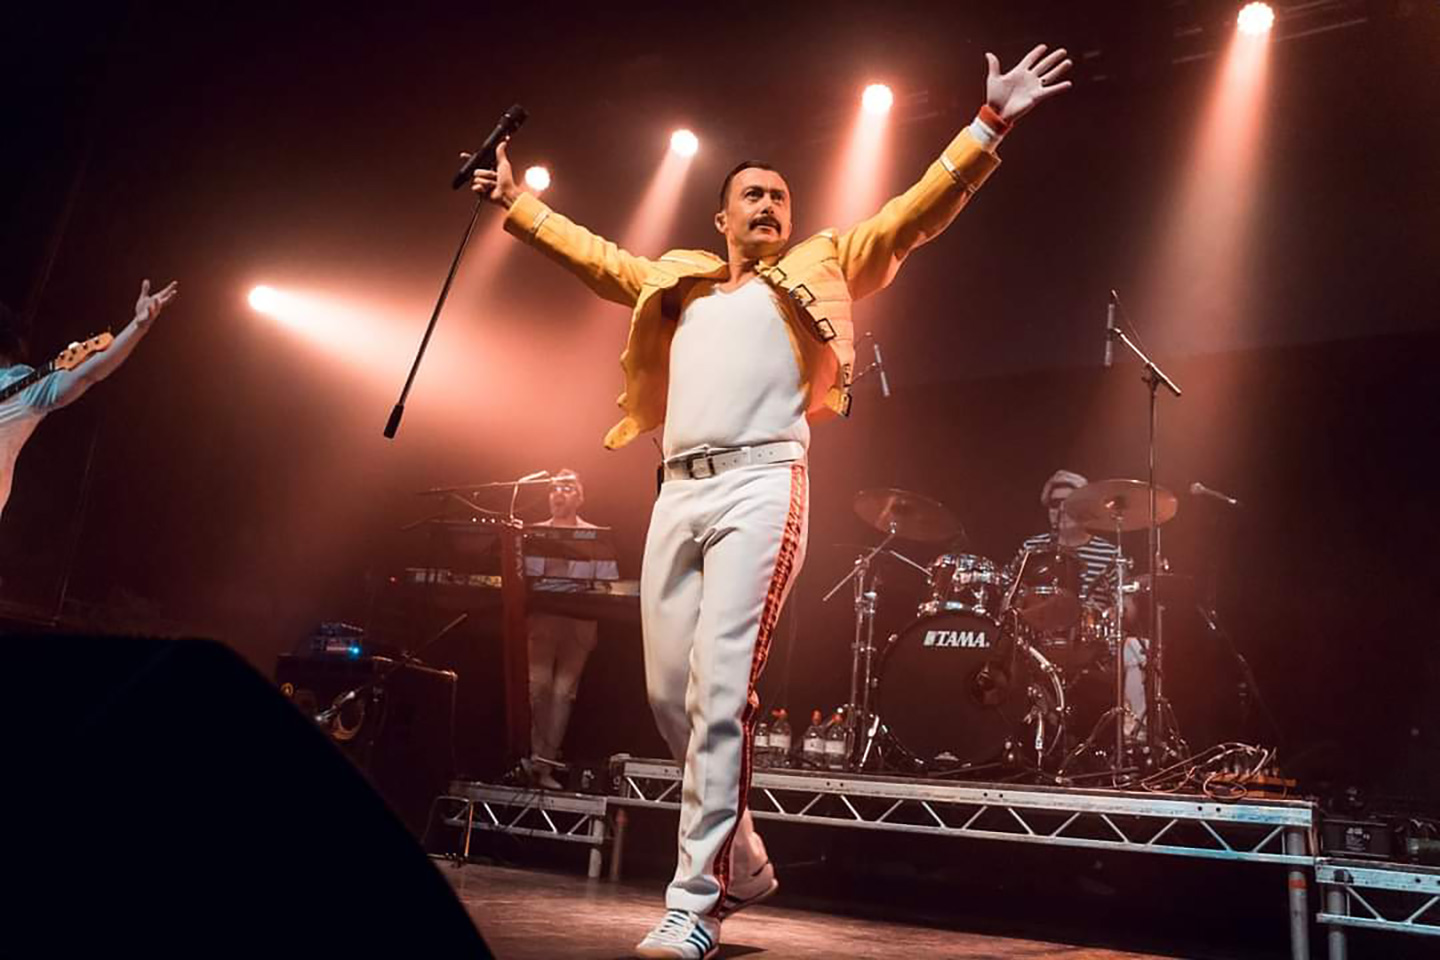 THE FREDDIE & QUEEN EXPERIENCE